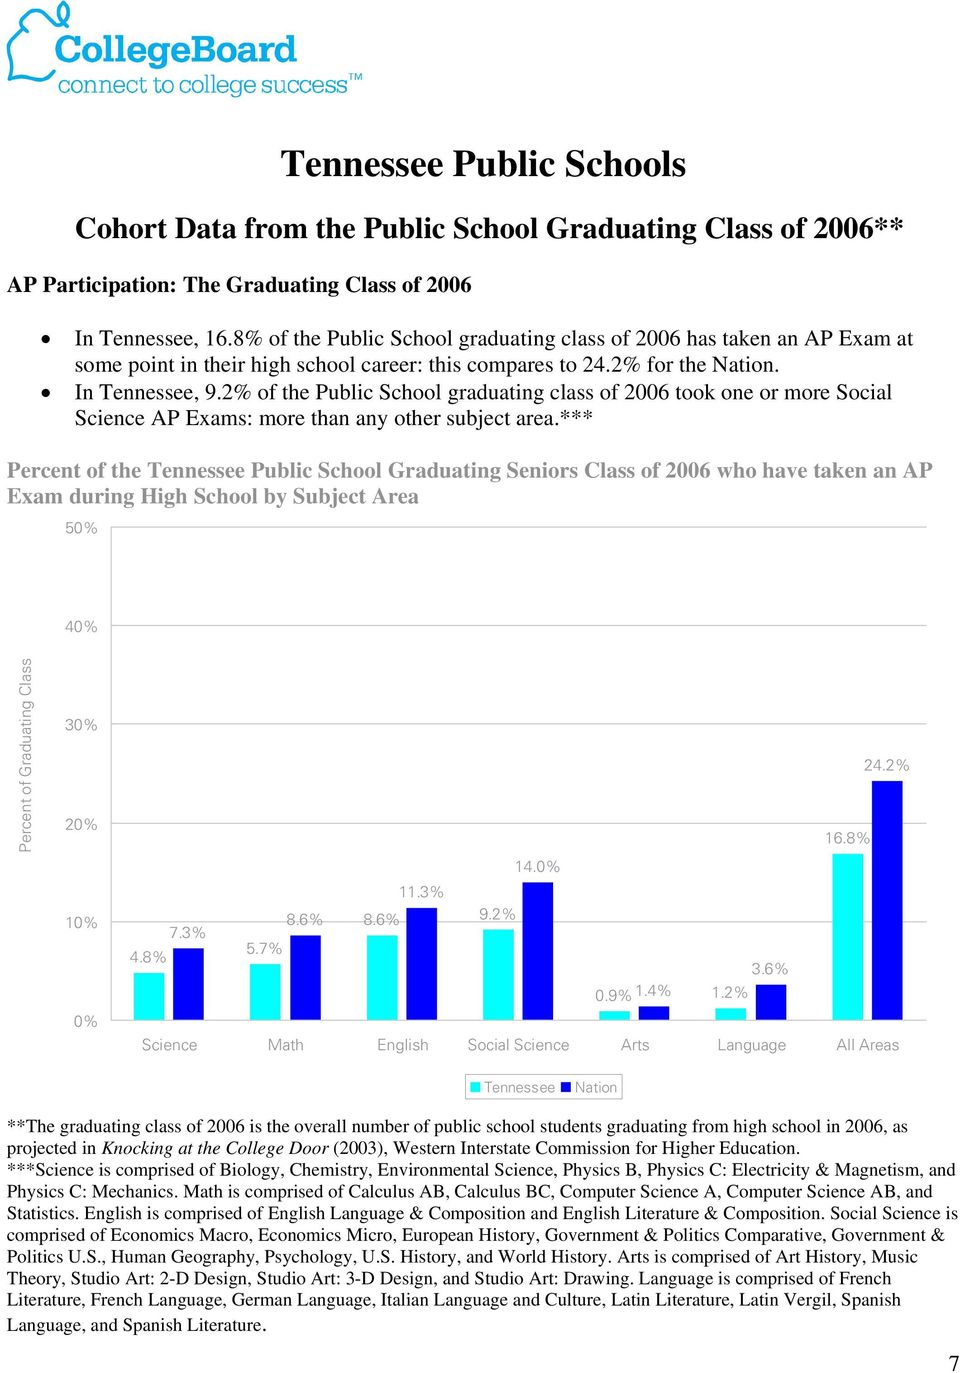 2% of the Public School graduating class of 26 took one or more Social Science AP Exams: more than any other subject area.